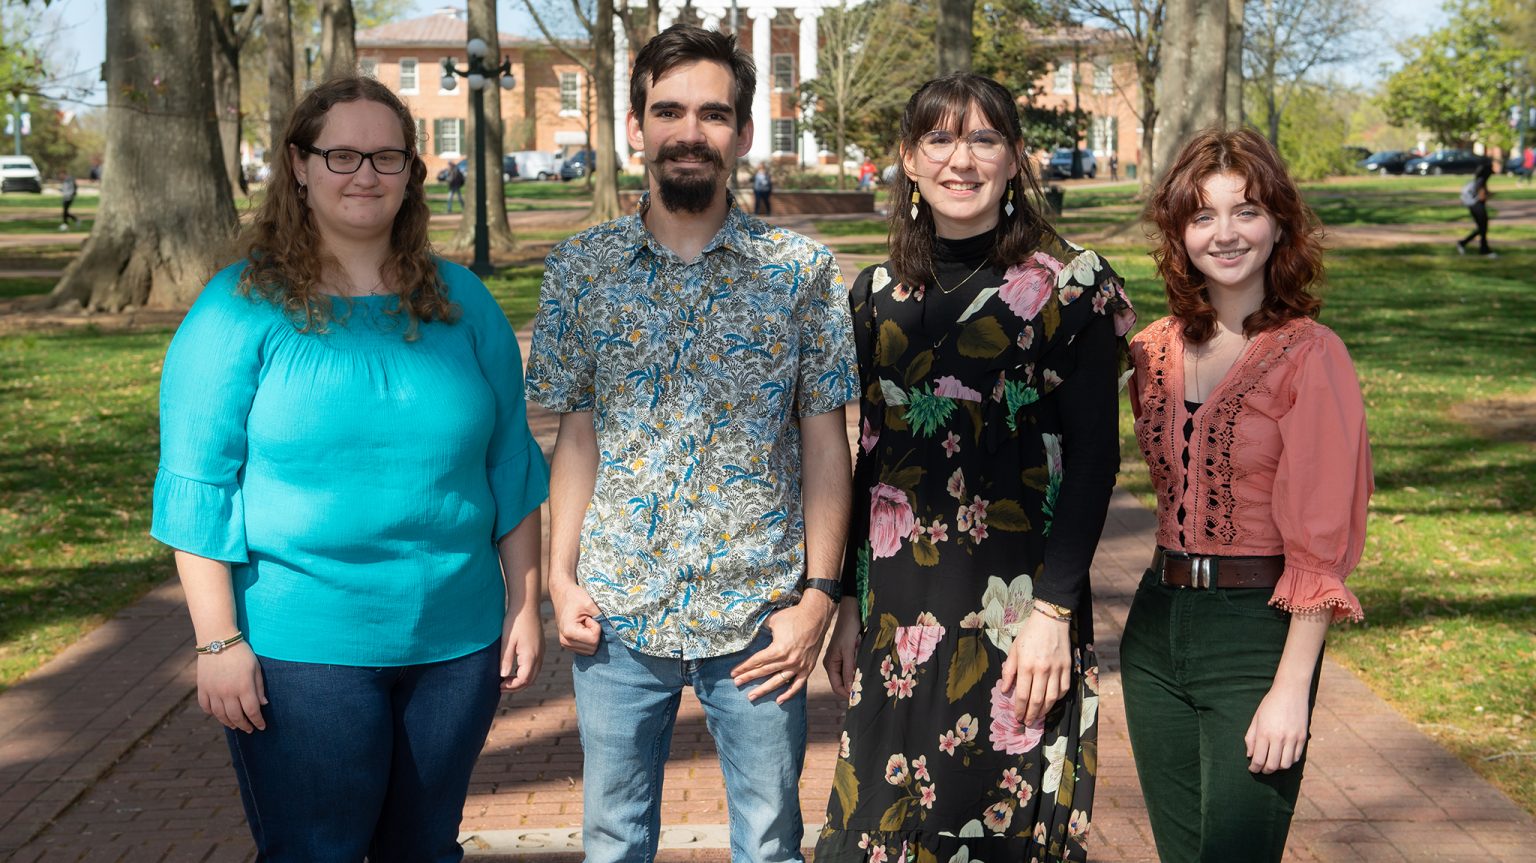 Students in the university’s Arabic Language Flagship program selected for a capstone program year in Morocco are (from left) Renee Summers, Taylor Northcutt, Emily Stewart and Dana Arneal. Photo by Kevin Bain/Ole Miss Digital Imaging Services